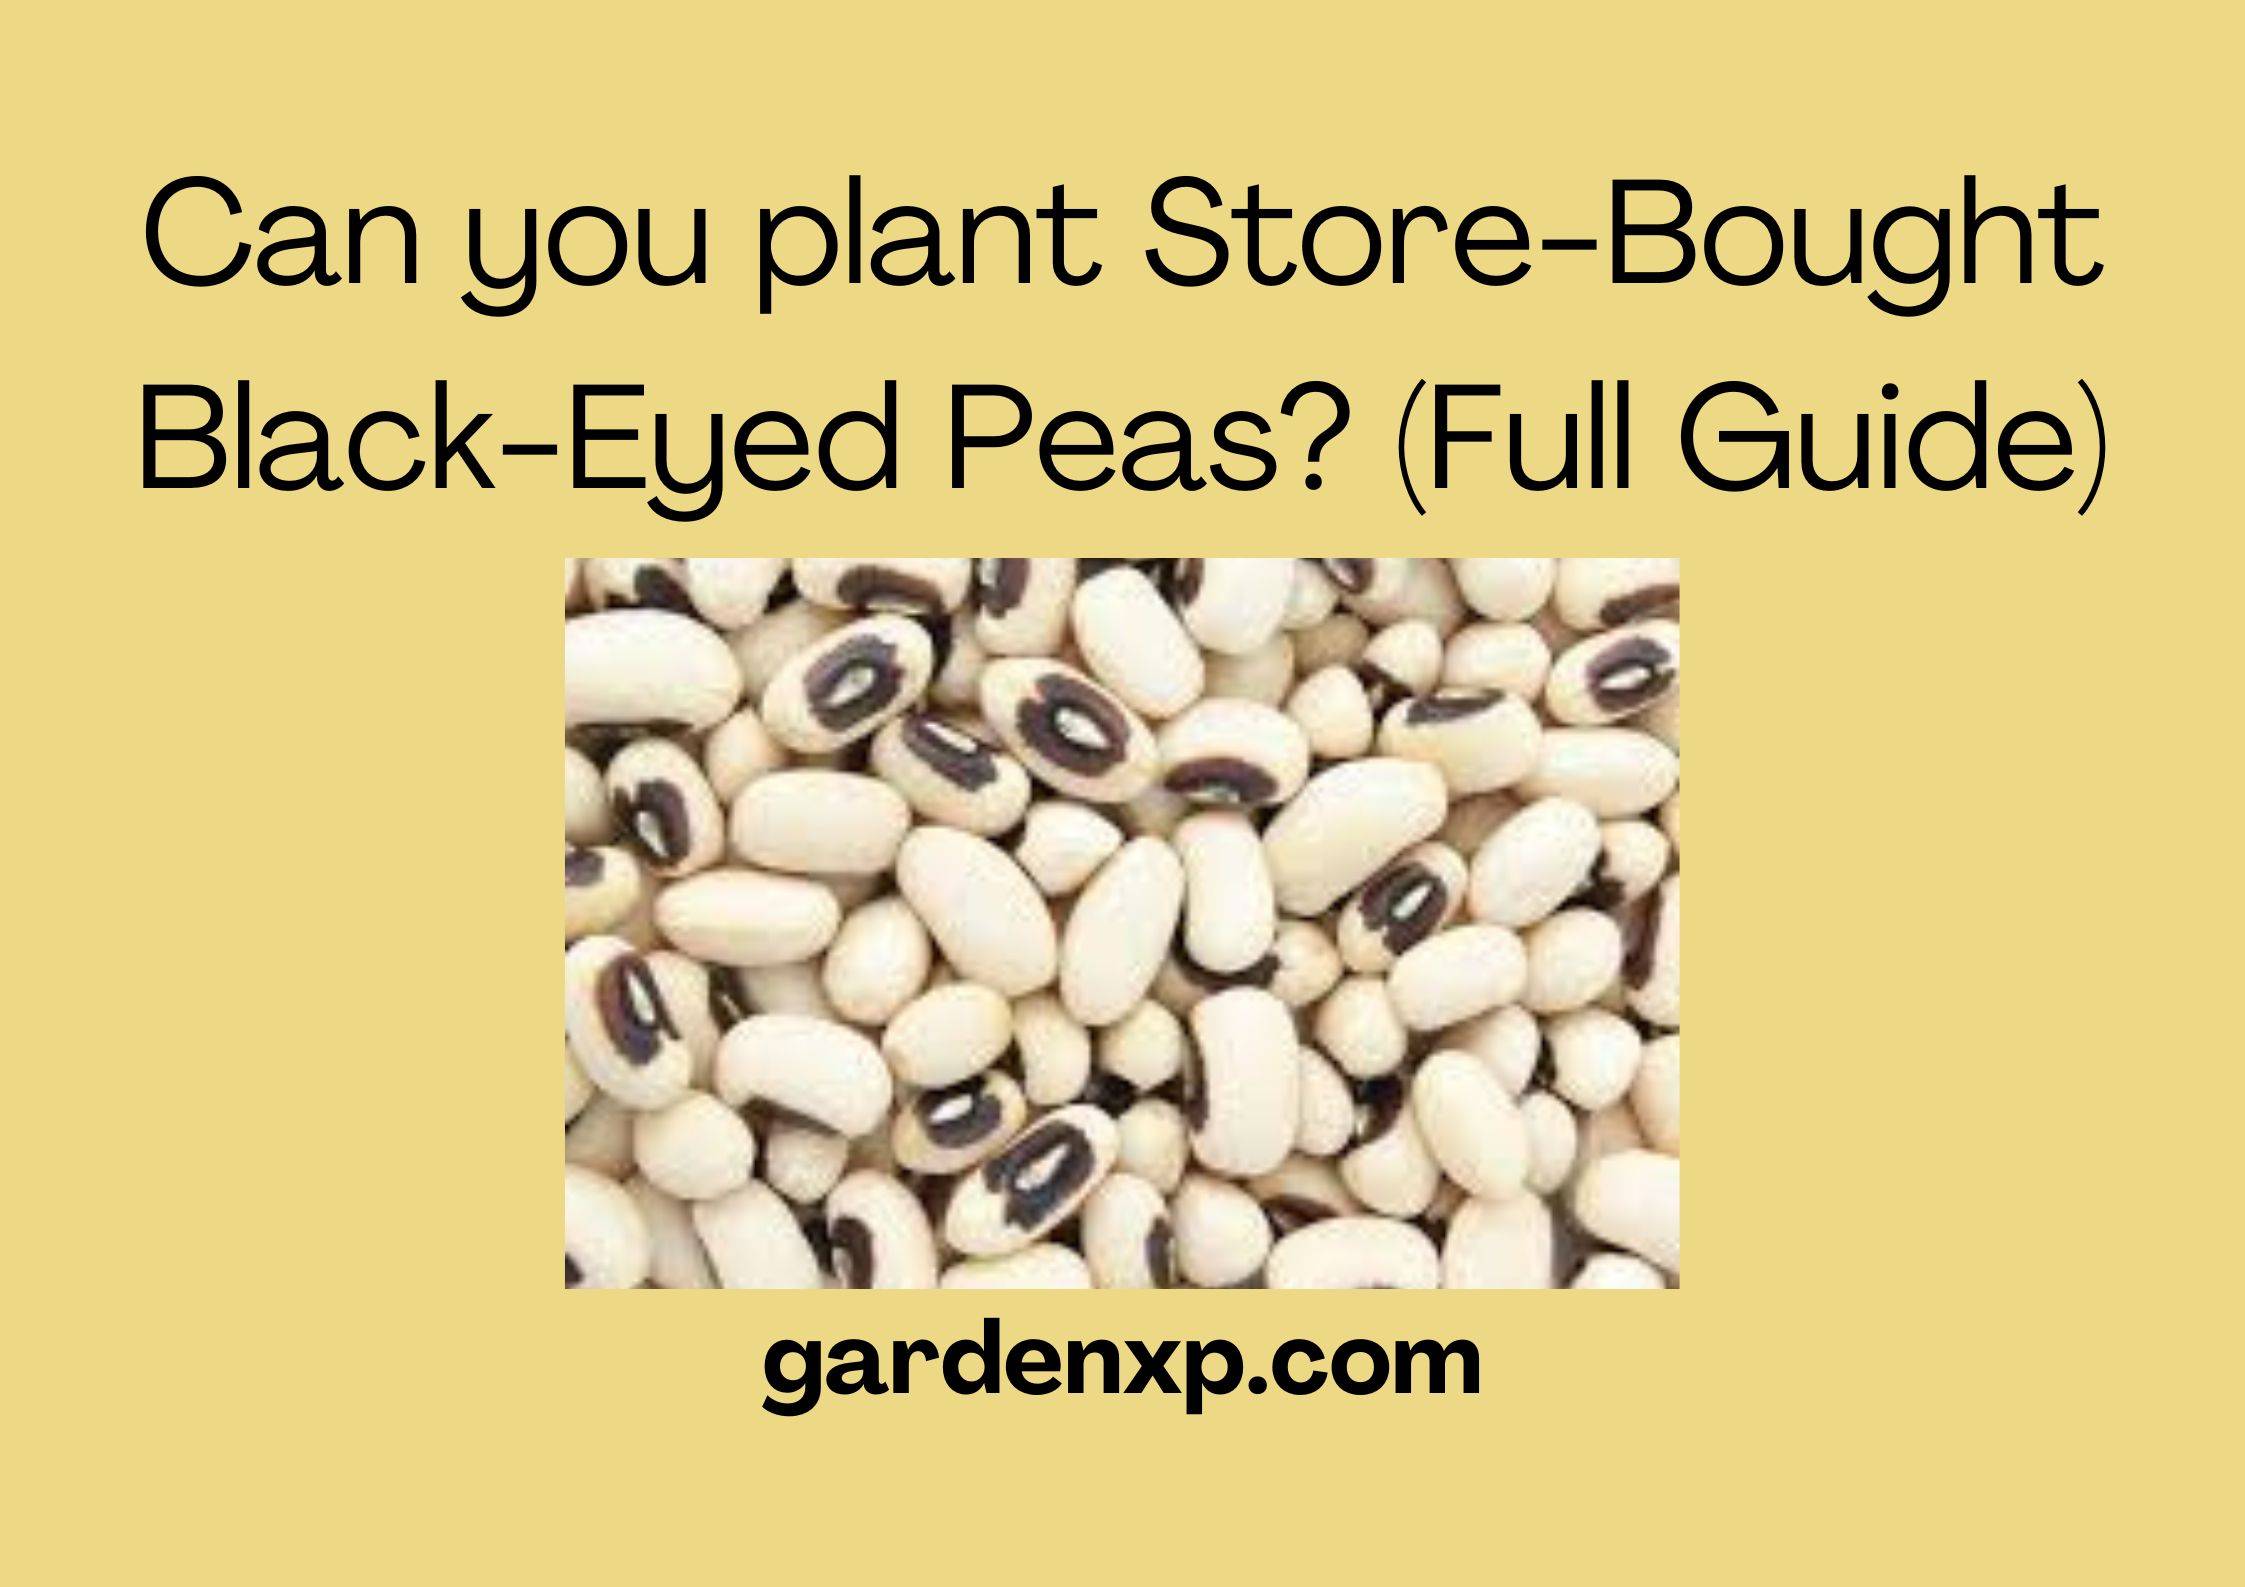 Can you plant Store-Bought Black-Eyed Peas? (Full Guide)